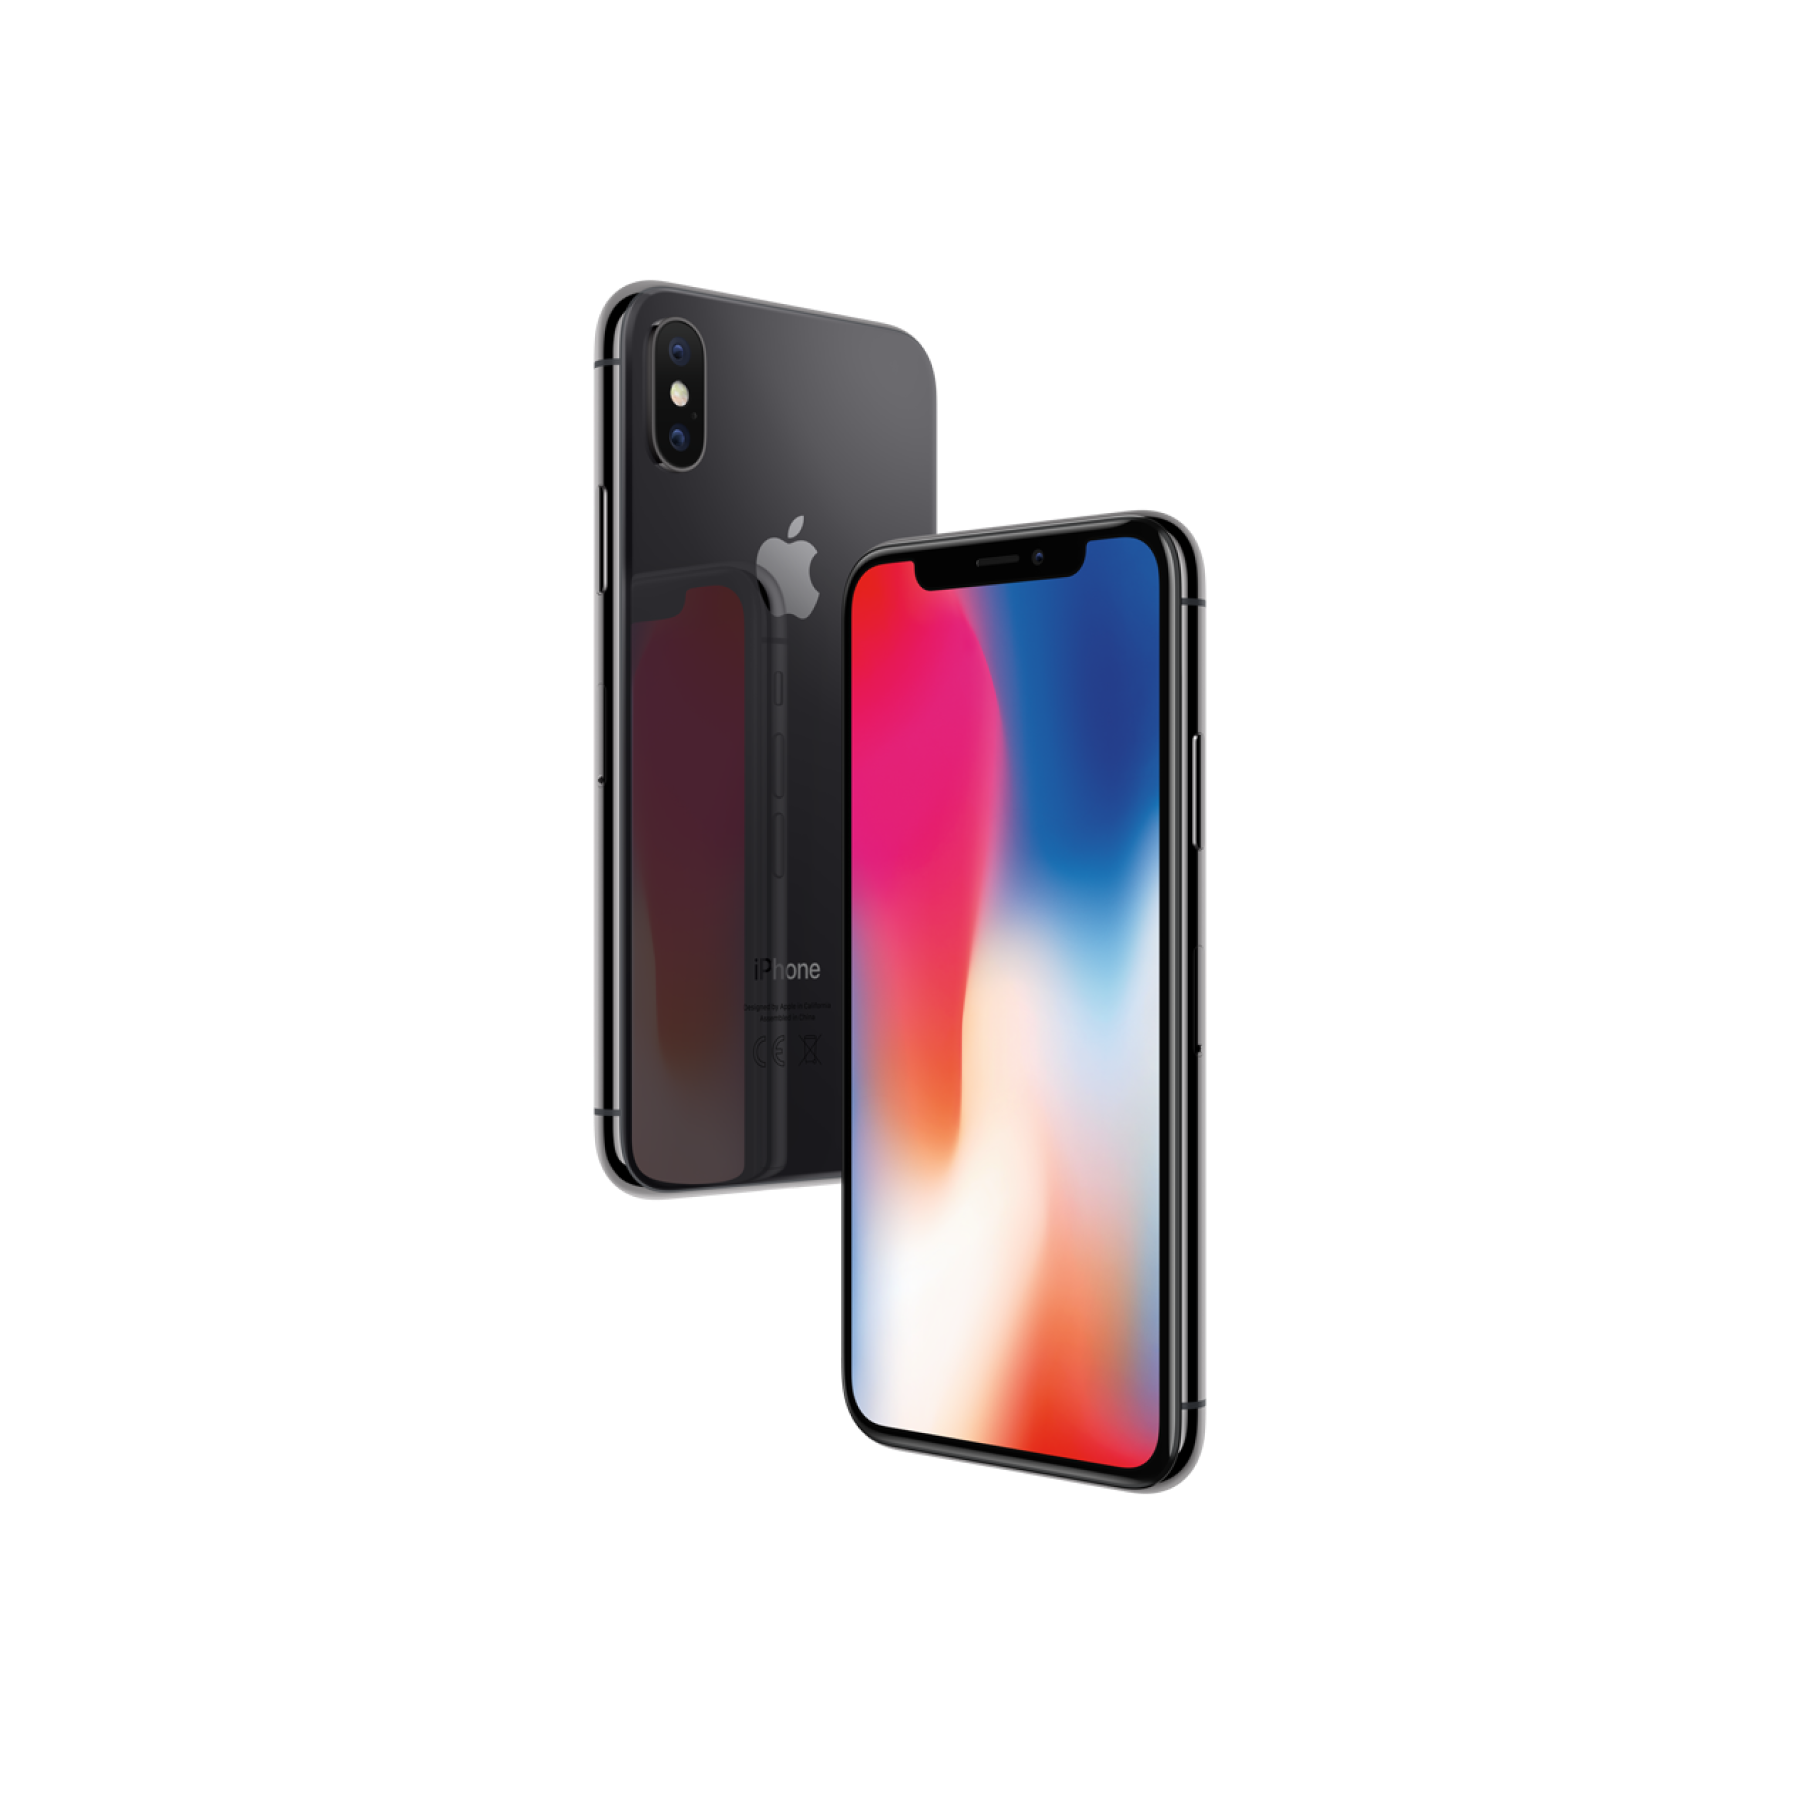 iPhone X 64GB - Space Grey (Better)